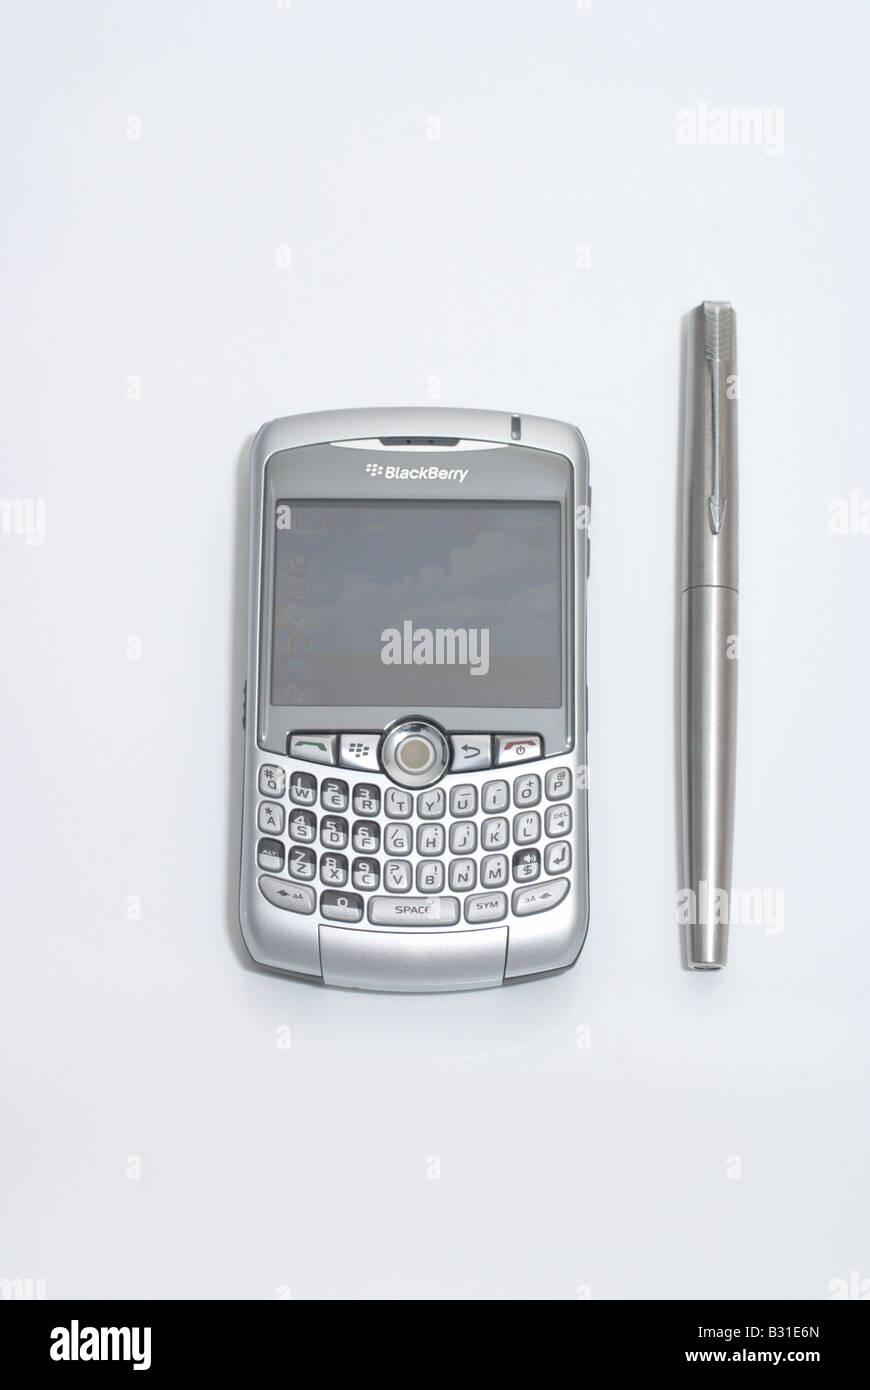 The tools of the trade for the modern business person. For editorial use only due to visibility of the Blackberry logo / design. Stock Photo